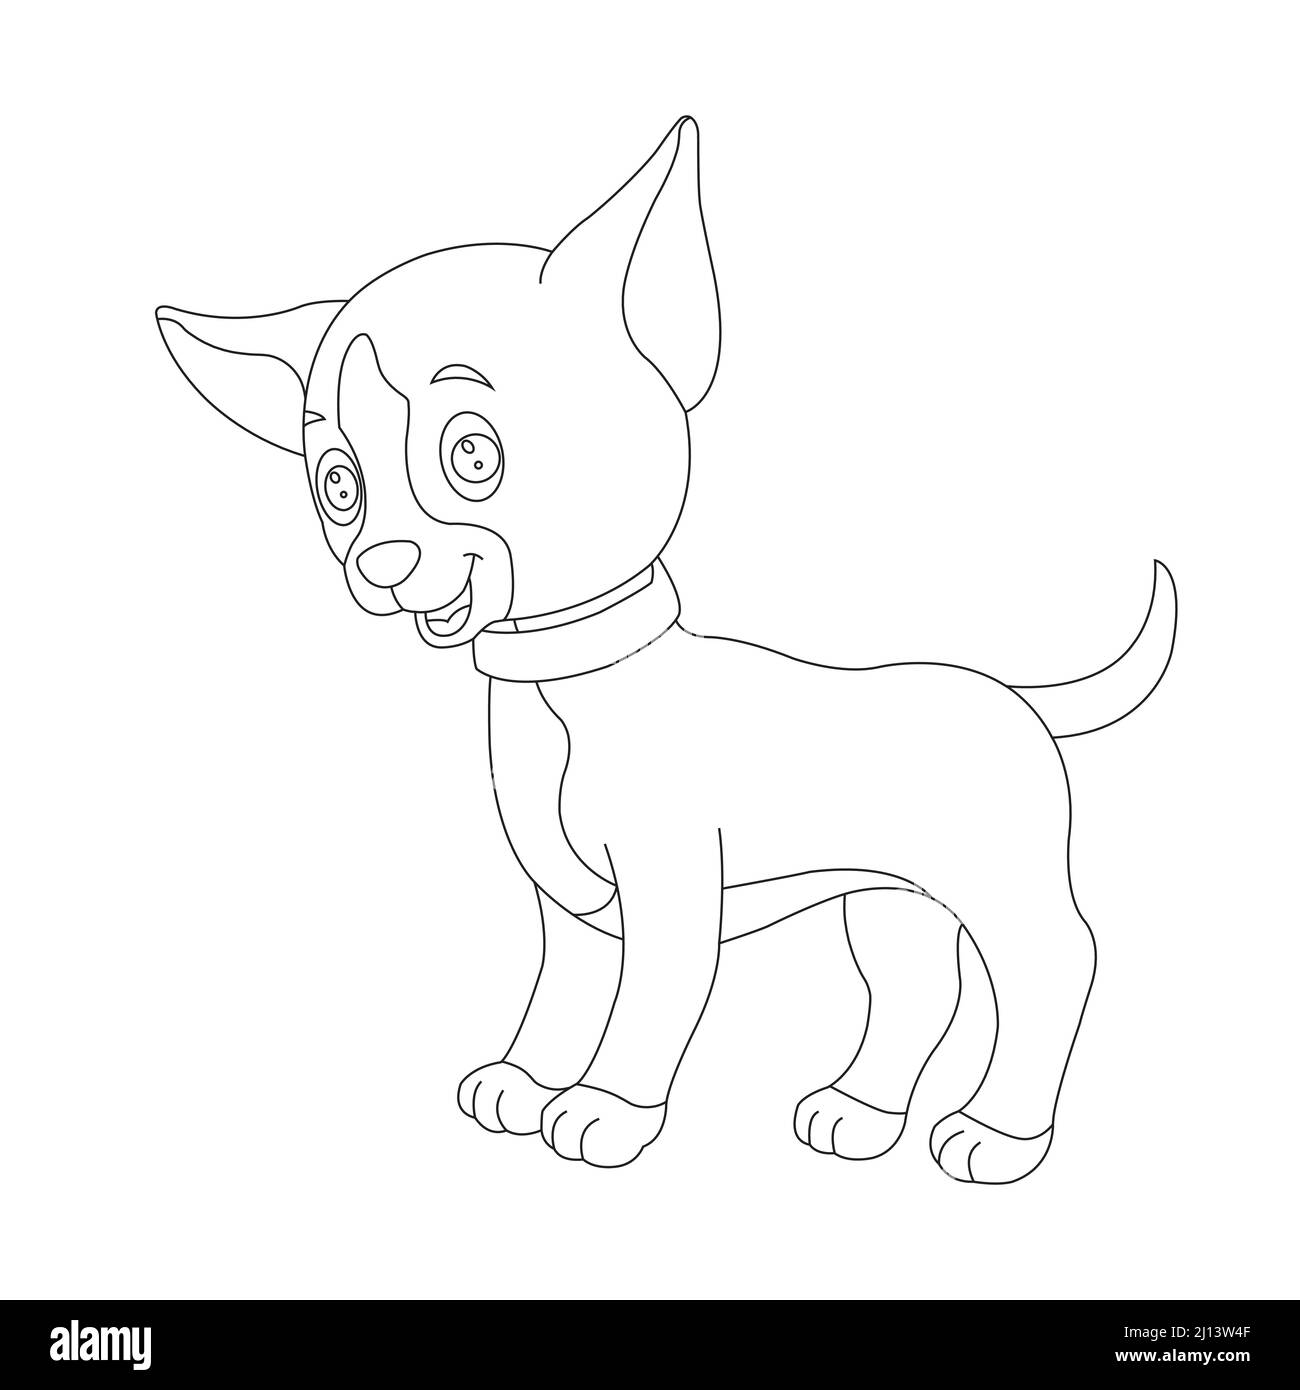 Cute puppy dog outline coloring page for kids animal coloring book cartoon vector illustration Stock Vector